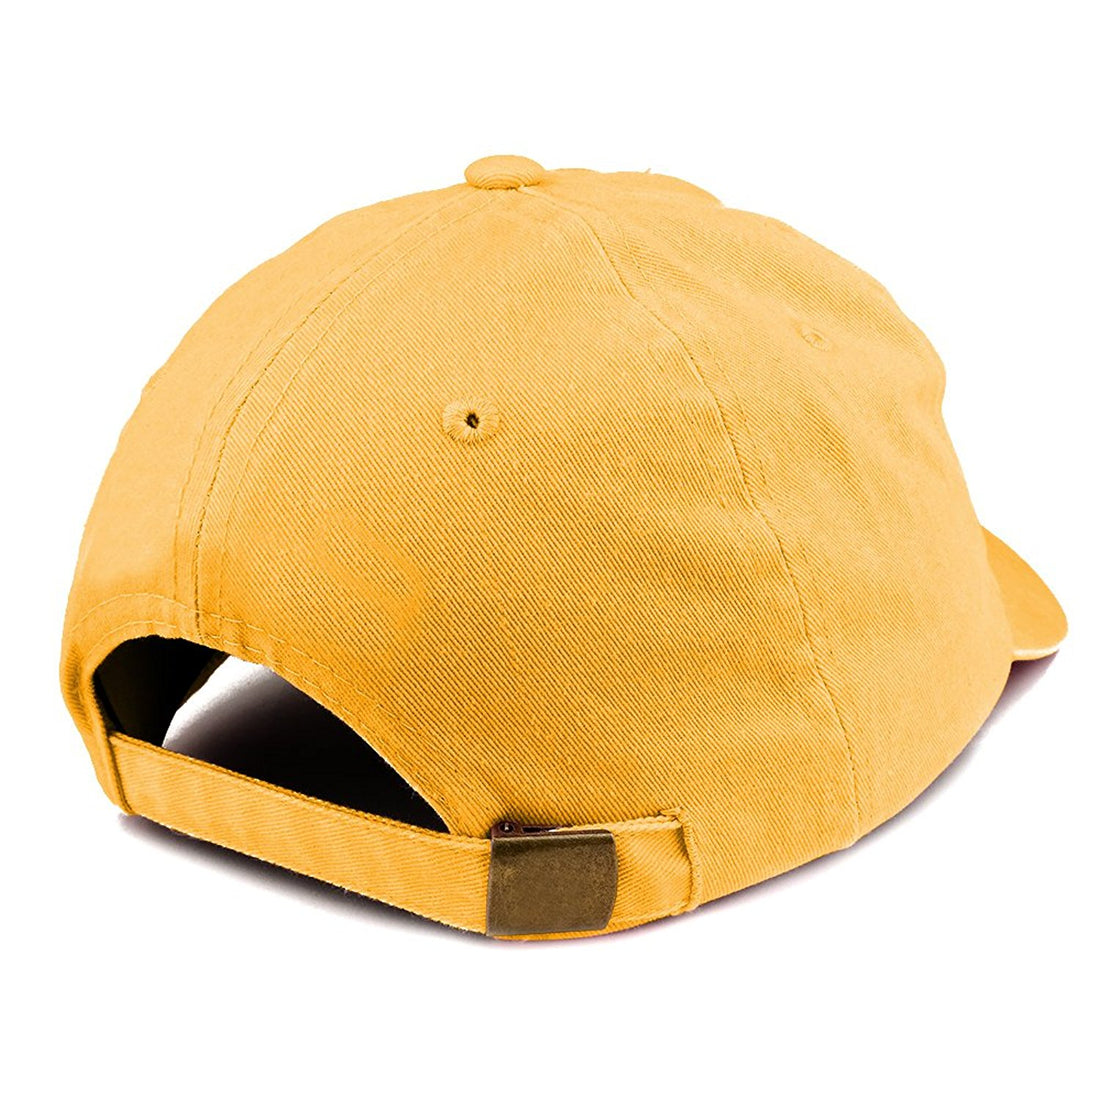 Trendy Apparel Shop Established 1975 Embroidered 44th Birthday Gift Pigment Dyed Washed Cotton Cap